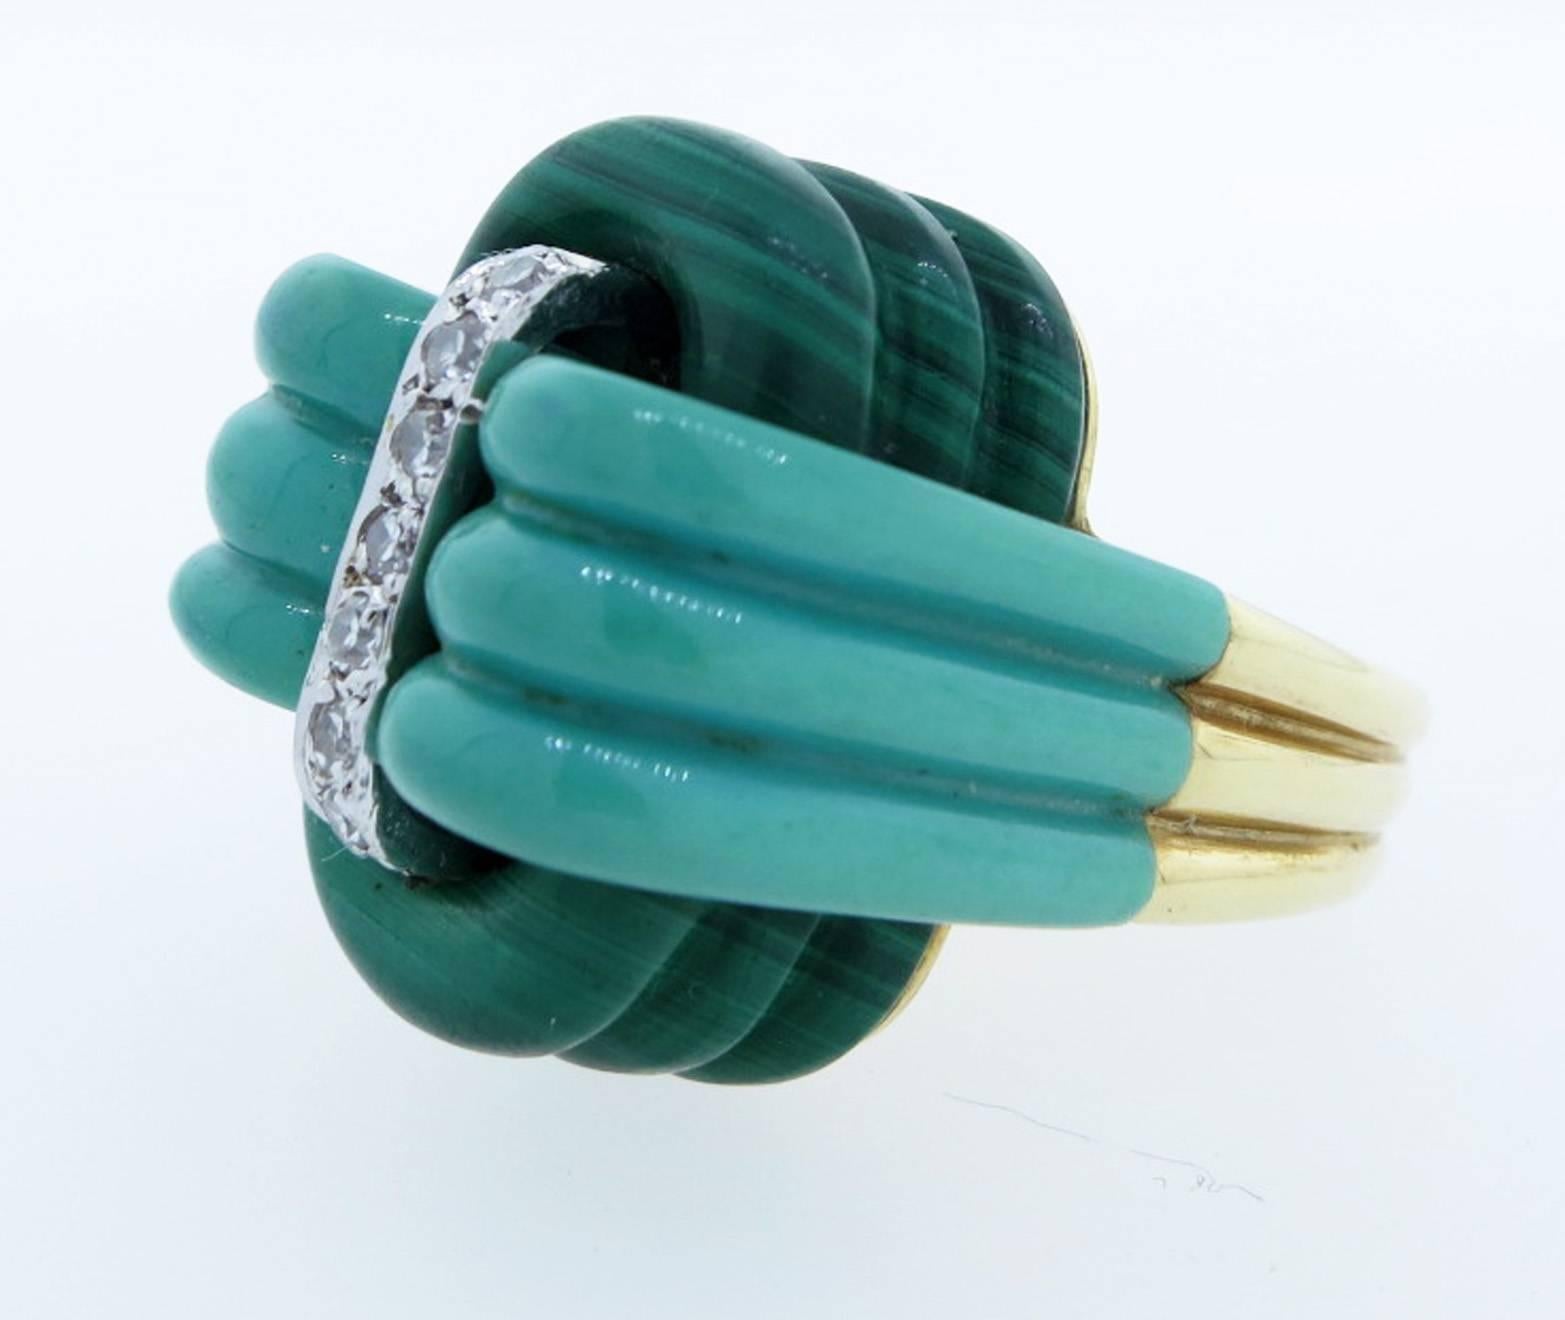 Sensational 14kt. yellow gold stacked carved Malachite and Amazonite ring circa 1970. The center is bead set in white gold with seven round accent diamonds.
The ring is size 6 1/2 and can be sized. Excellent condition !